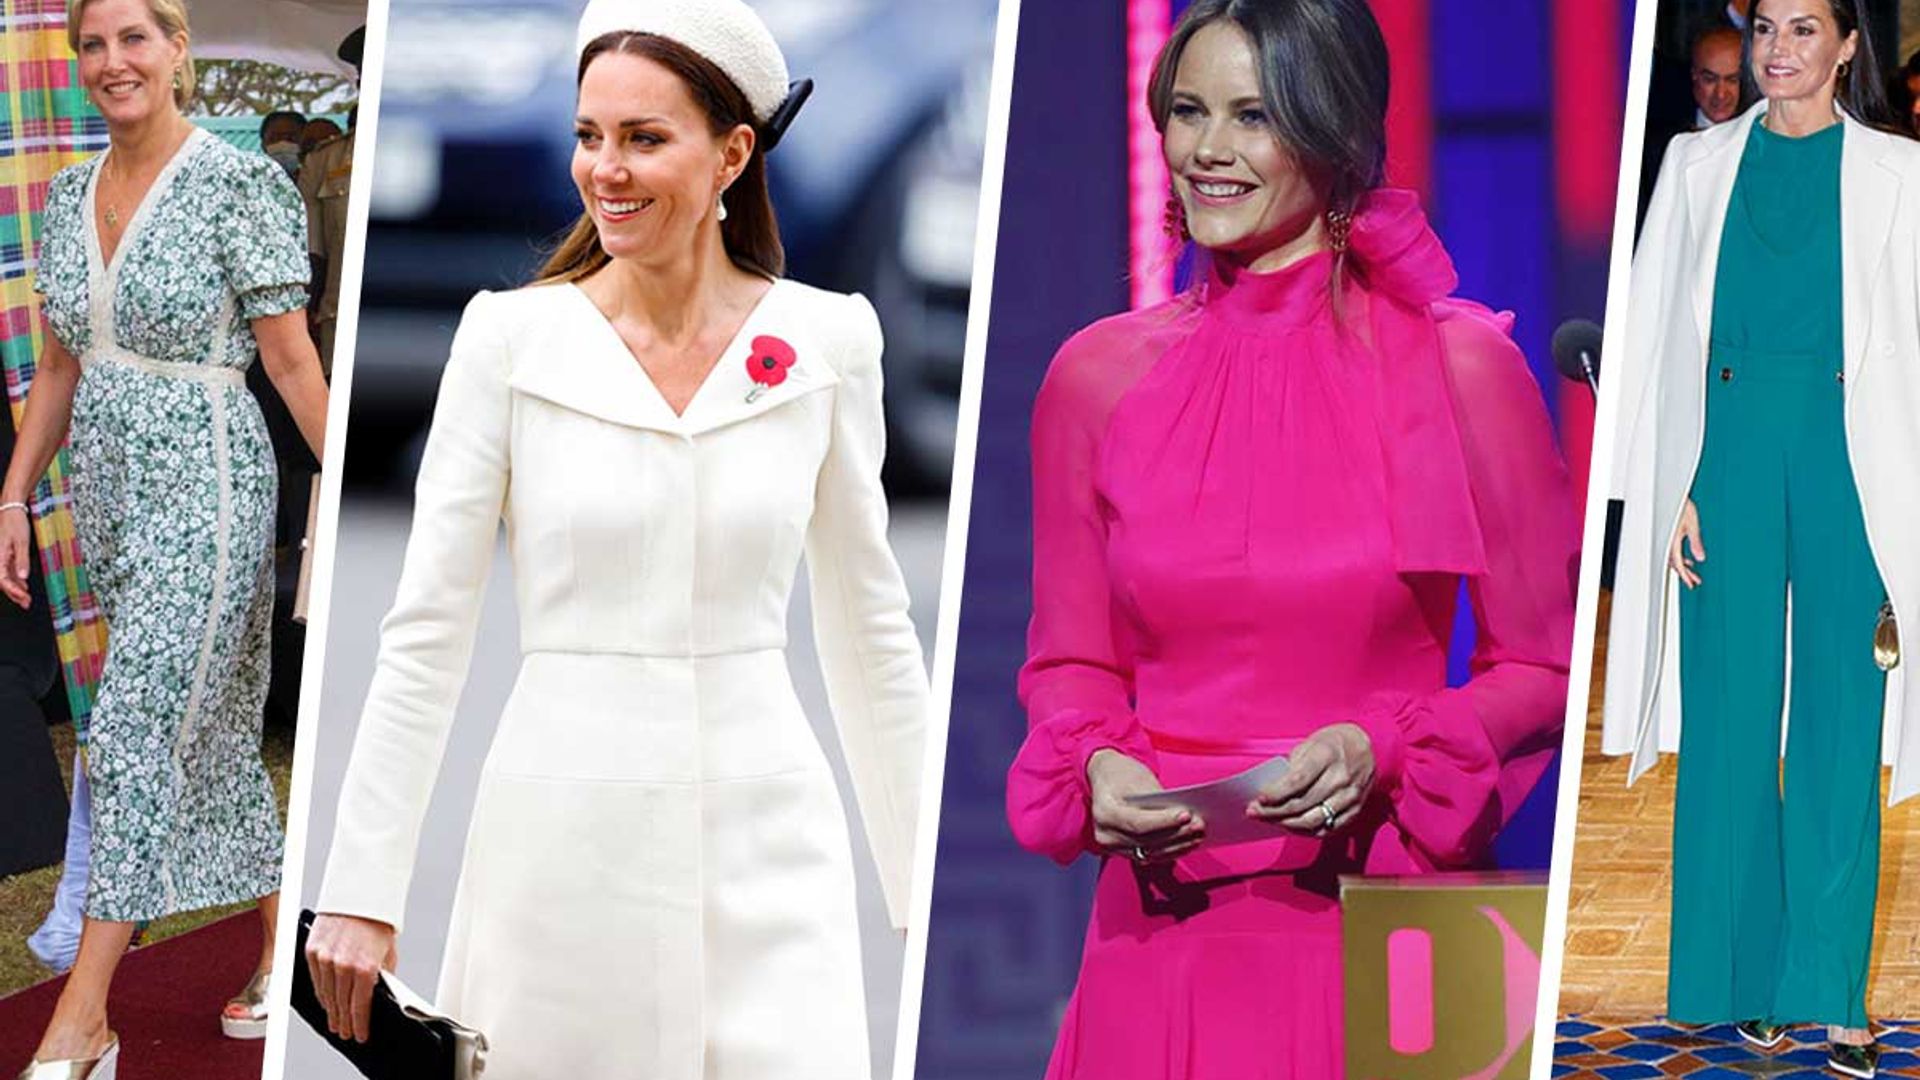 Royal Style Watch: From Kate Middleton's Alexander McQueen dress to Sophie Wessex's Prada shoes